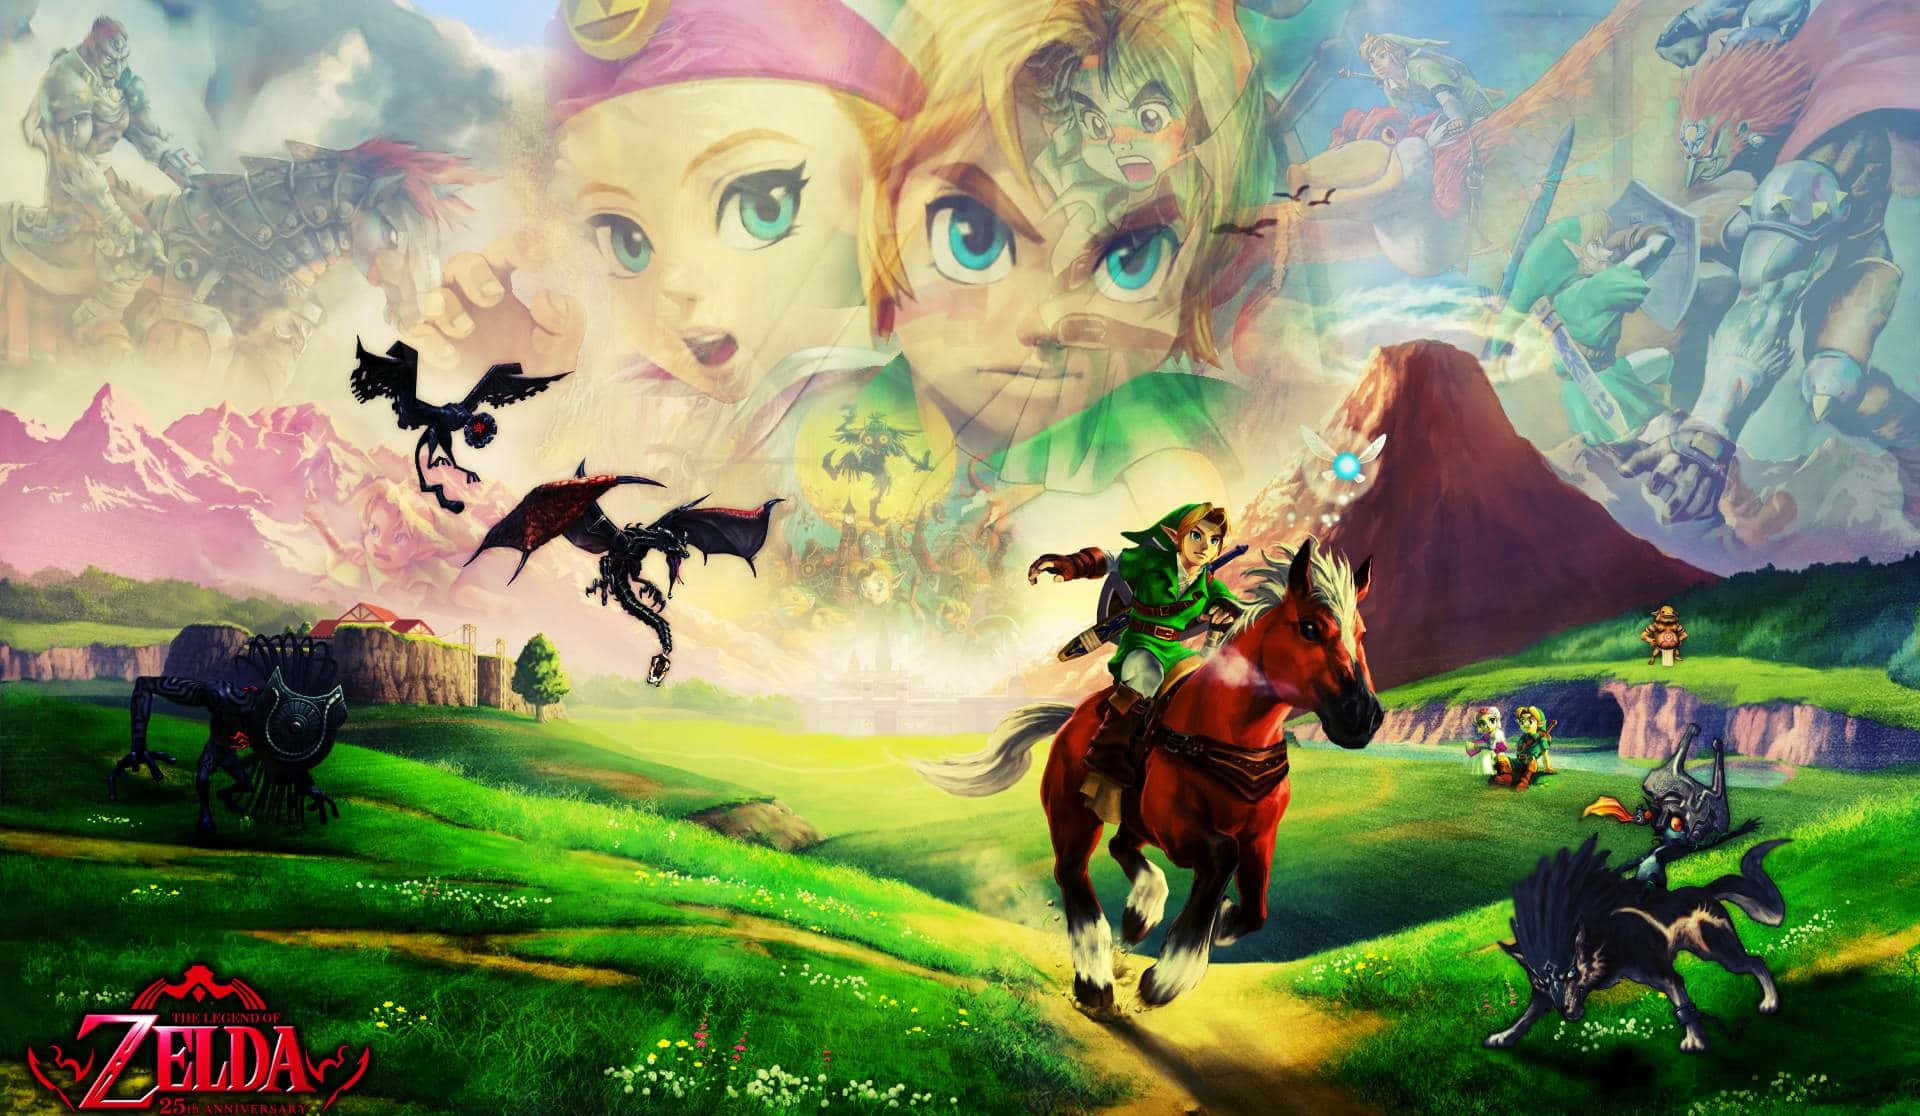 Group of characters from The Legend of Zelda series Wallpaper